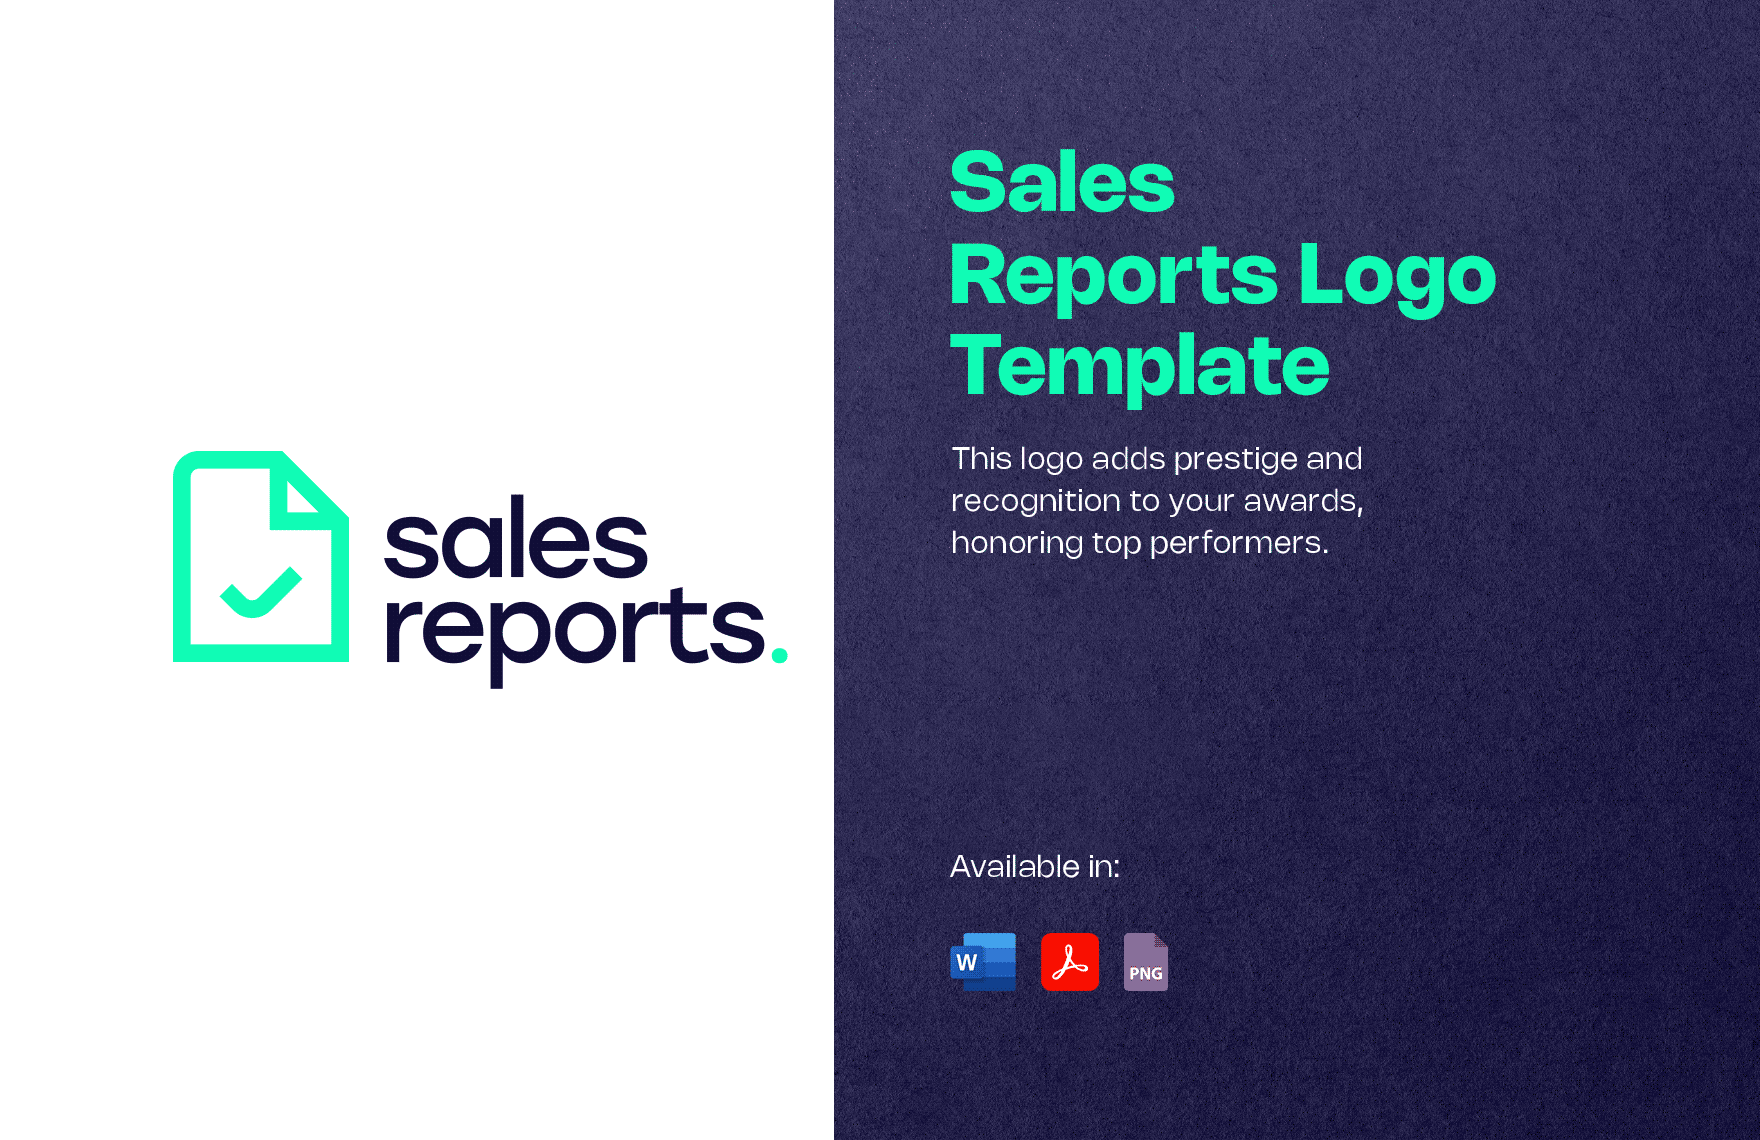 Sales Reports Logo Template